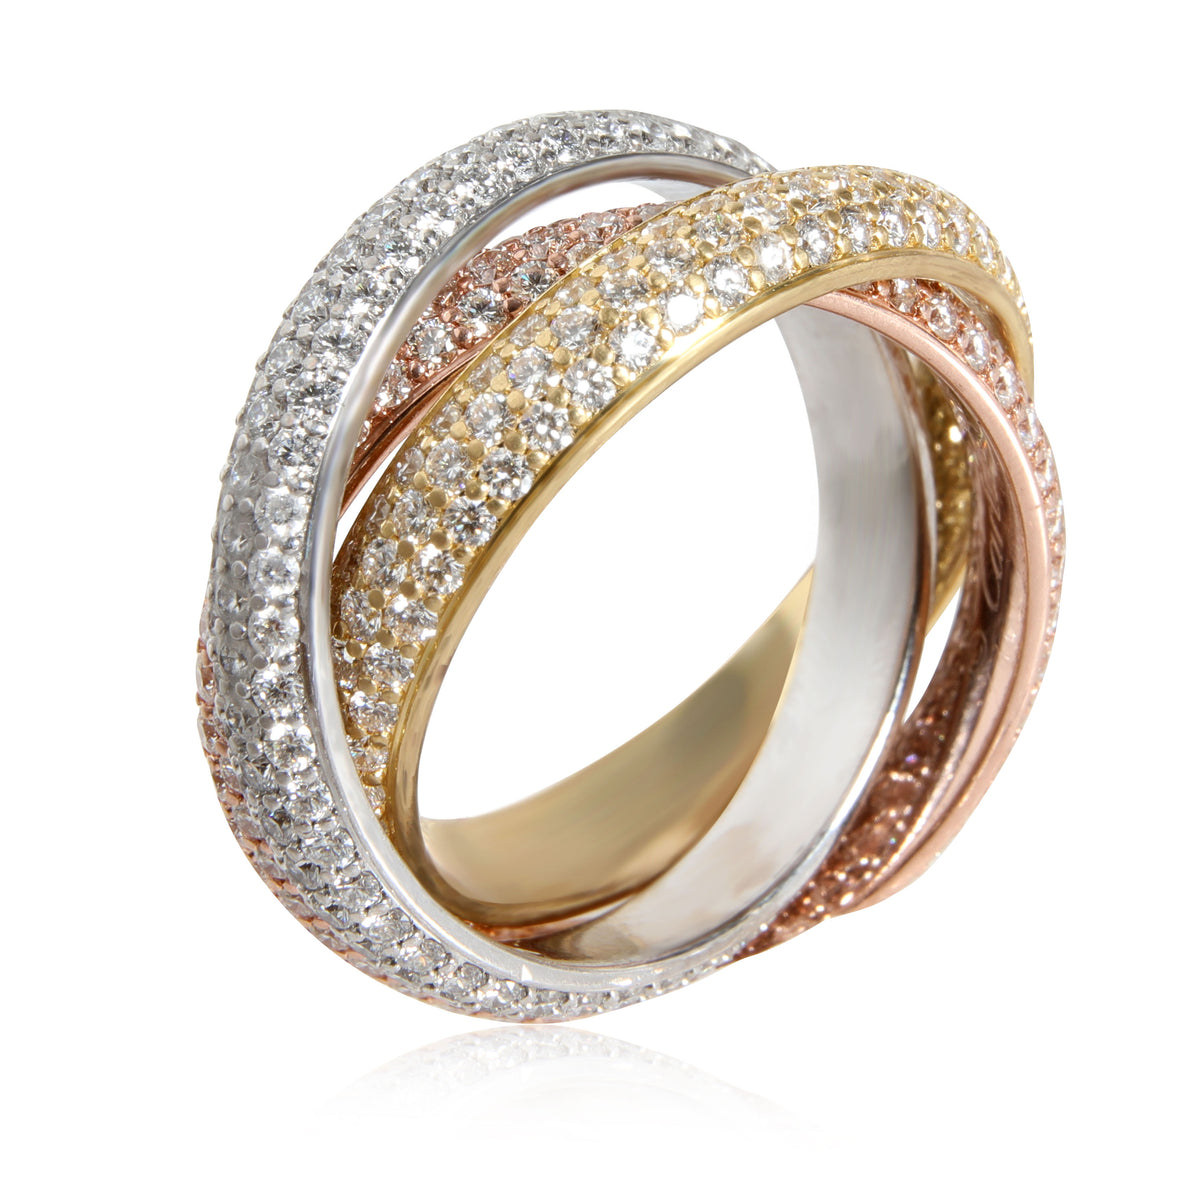 Cartier Trinity Pave Diamond Ring in 18k 3 Tone Gold 2.98 CTW